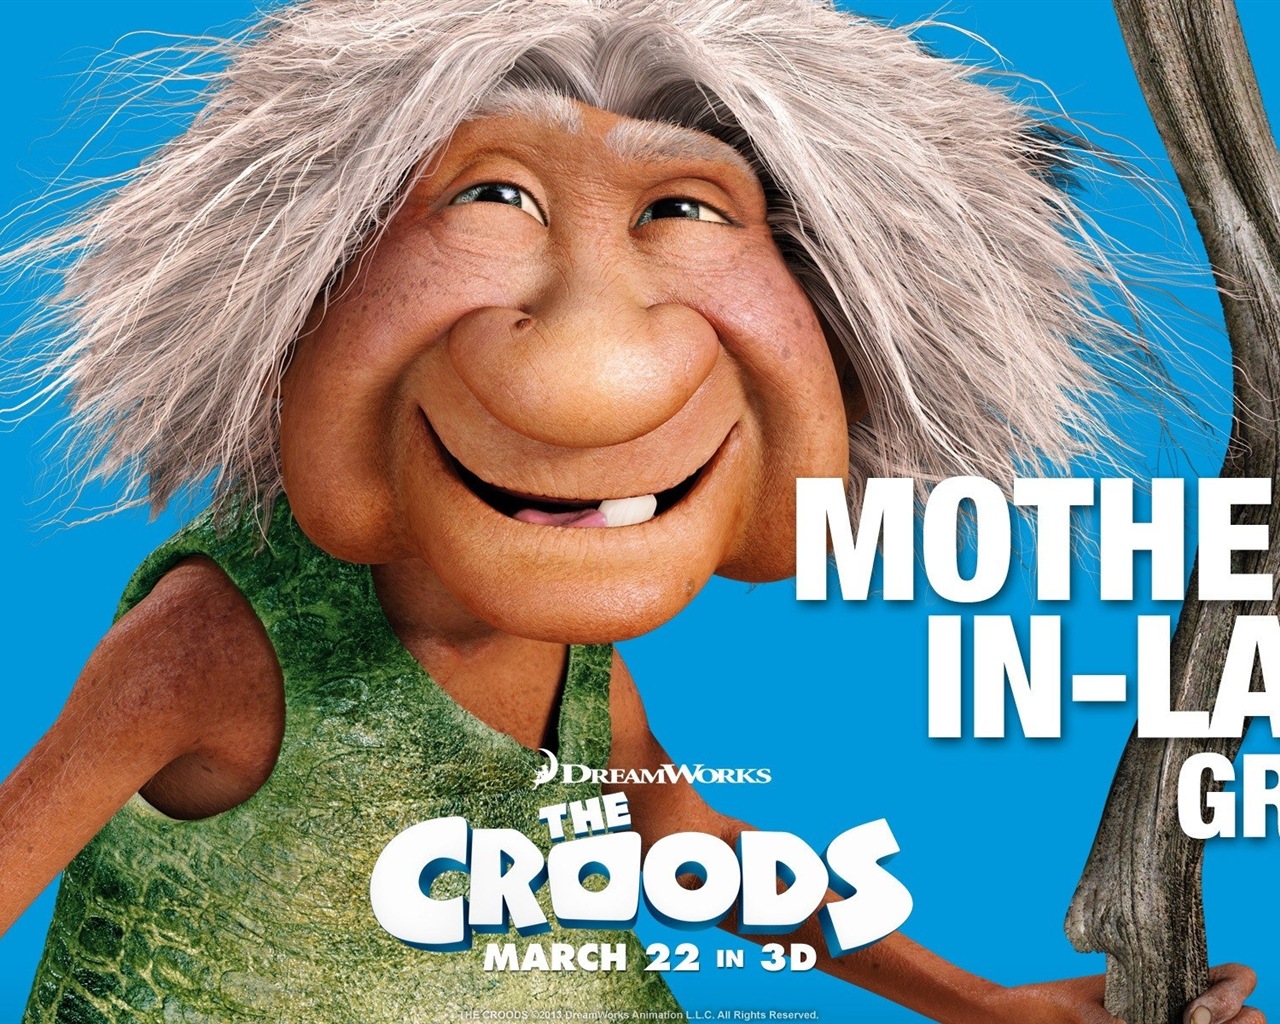 V Croods HD Movie Wallpapers #6 - 1280x1024